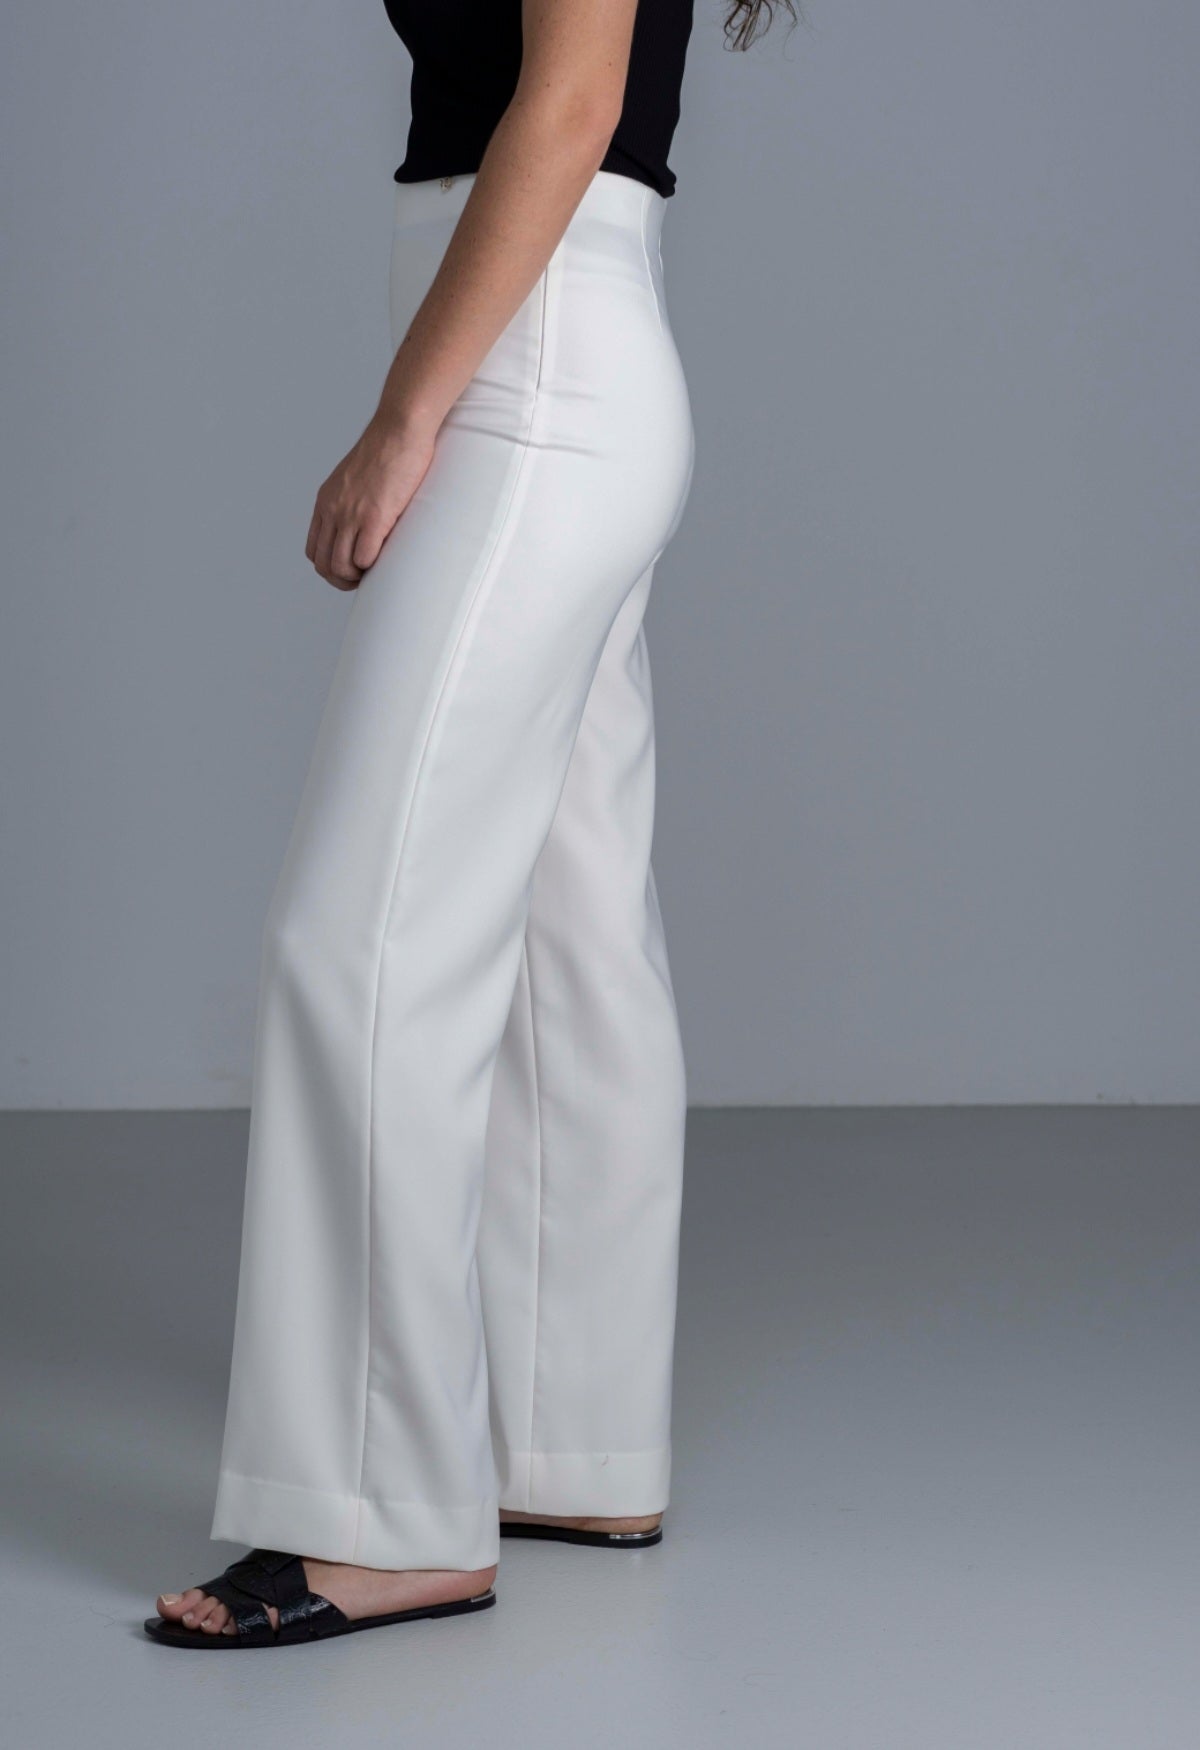 Hongo wide leg high rise trousers in white
Product code 1072H002